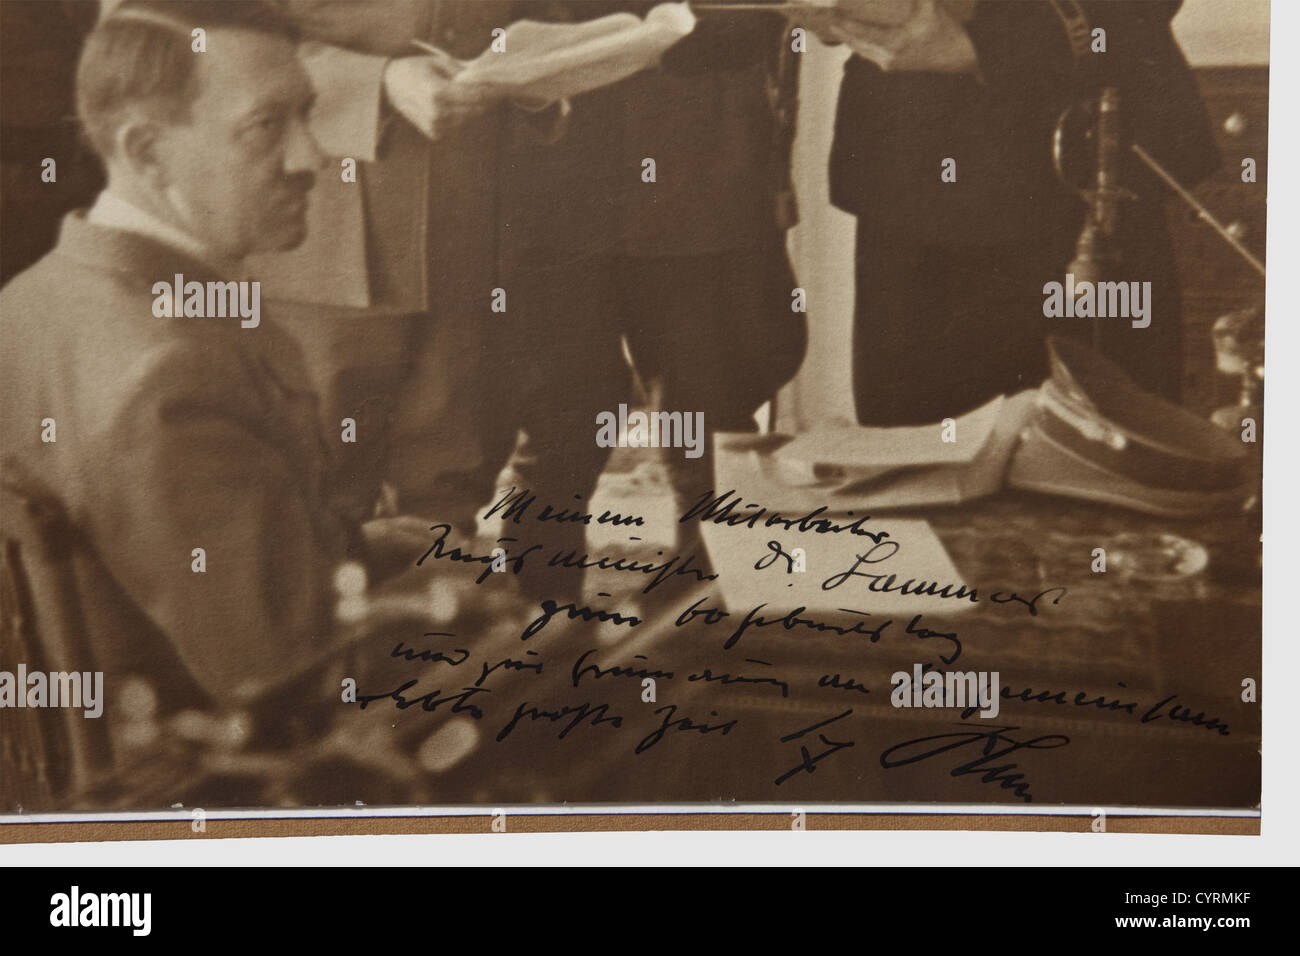 Adolf Hitler,a photograph dedicated to Hans-Heinrich Lammers on occasion of his 60th birthday Large-sized picture(24 x 23.7 cm trimmed?),Hitler sitting at his desk,in front of him Reichsministers Lammers and Frick as well as Reichsleiter Martin Bormann and SS Gruppenführer Wilhelm Stuckart,the lower edge with handwritten ink dedication "To my assistant,Reichsminister Dr.Lammers,for his 60th birthday and in remembrance of eventful times we went through together - Adolf Hitler." Well readable autograph applied to picture with bold ink ,Additional-Rights-Clearences-Not Available Stock Photo